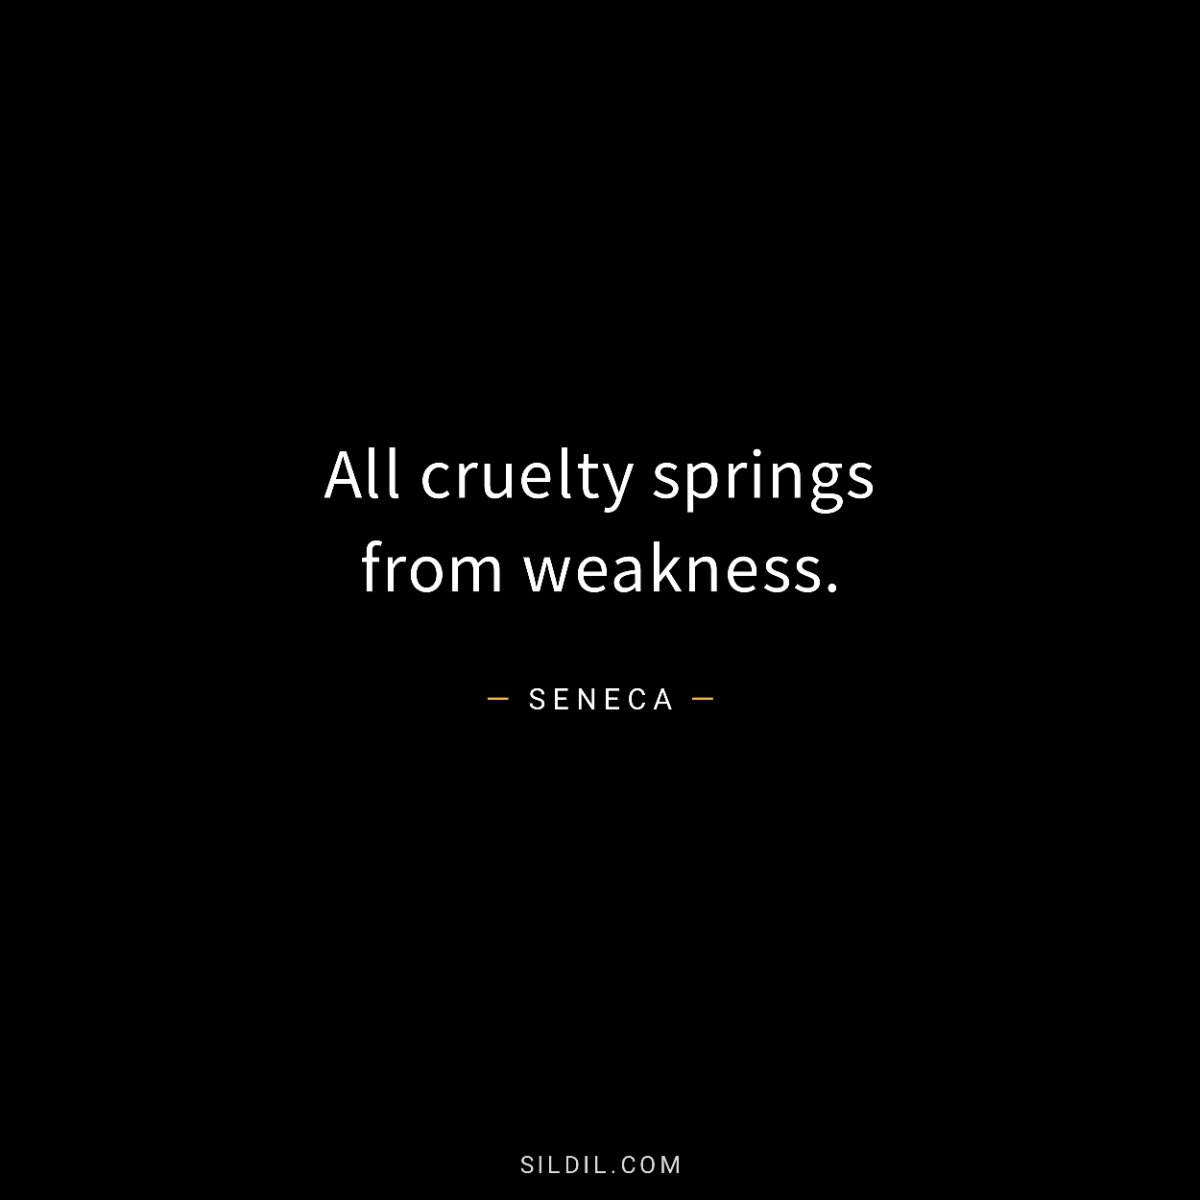 All cruelty springs from weakness.